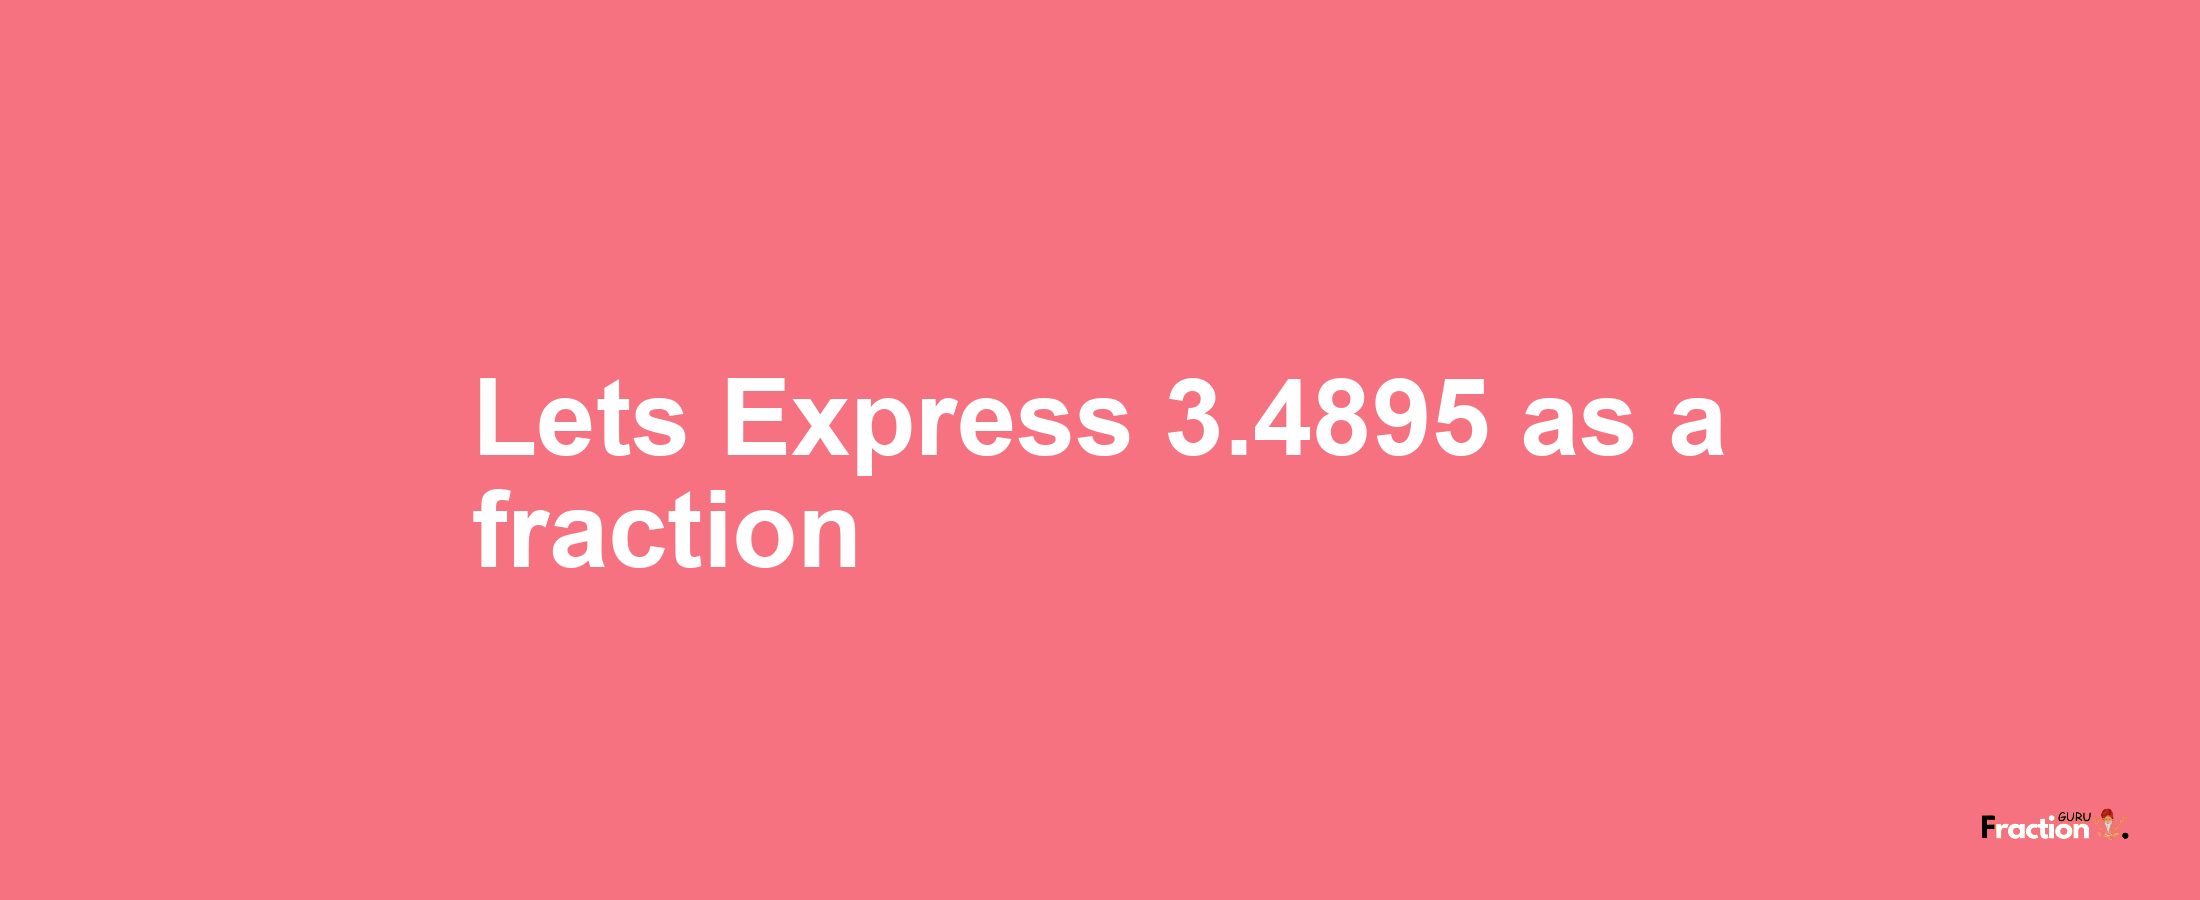 Lets Express 3.4895 as afraction